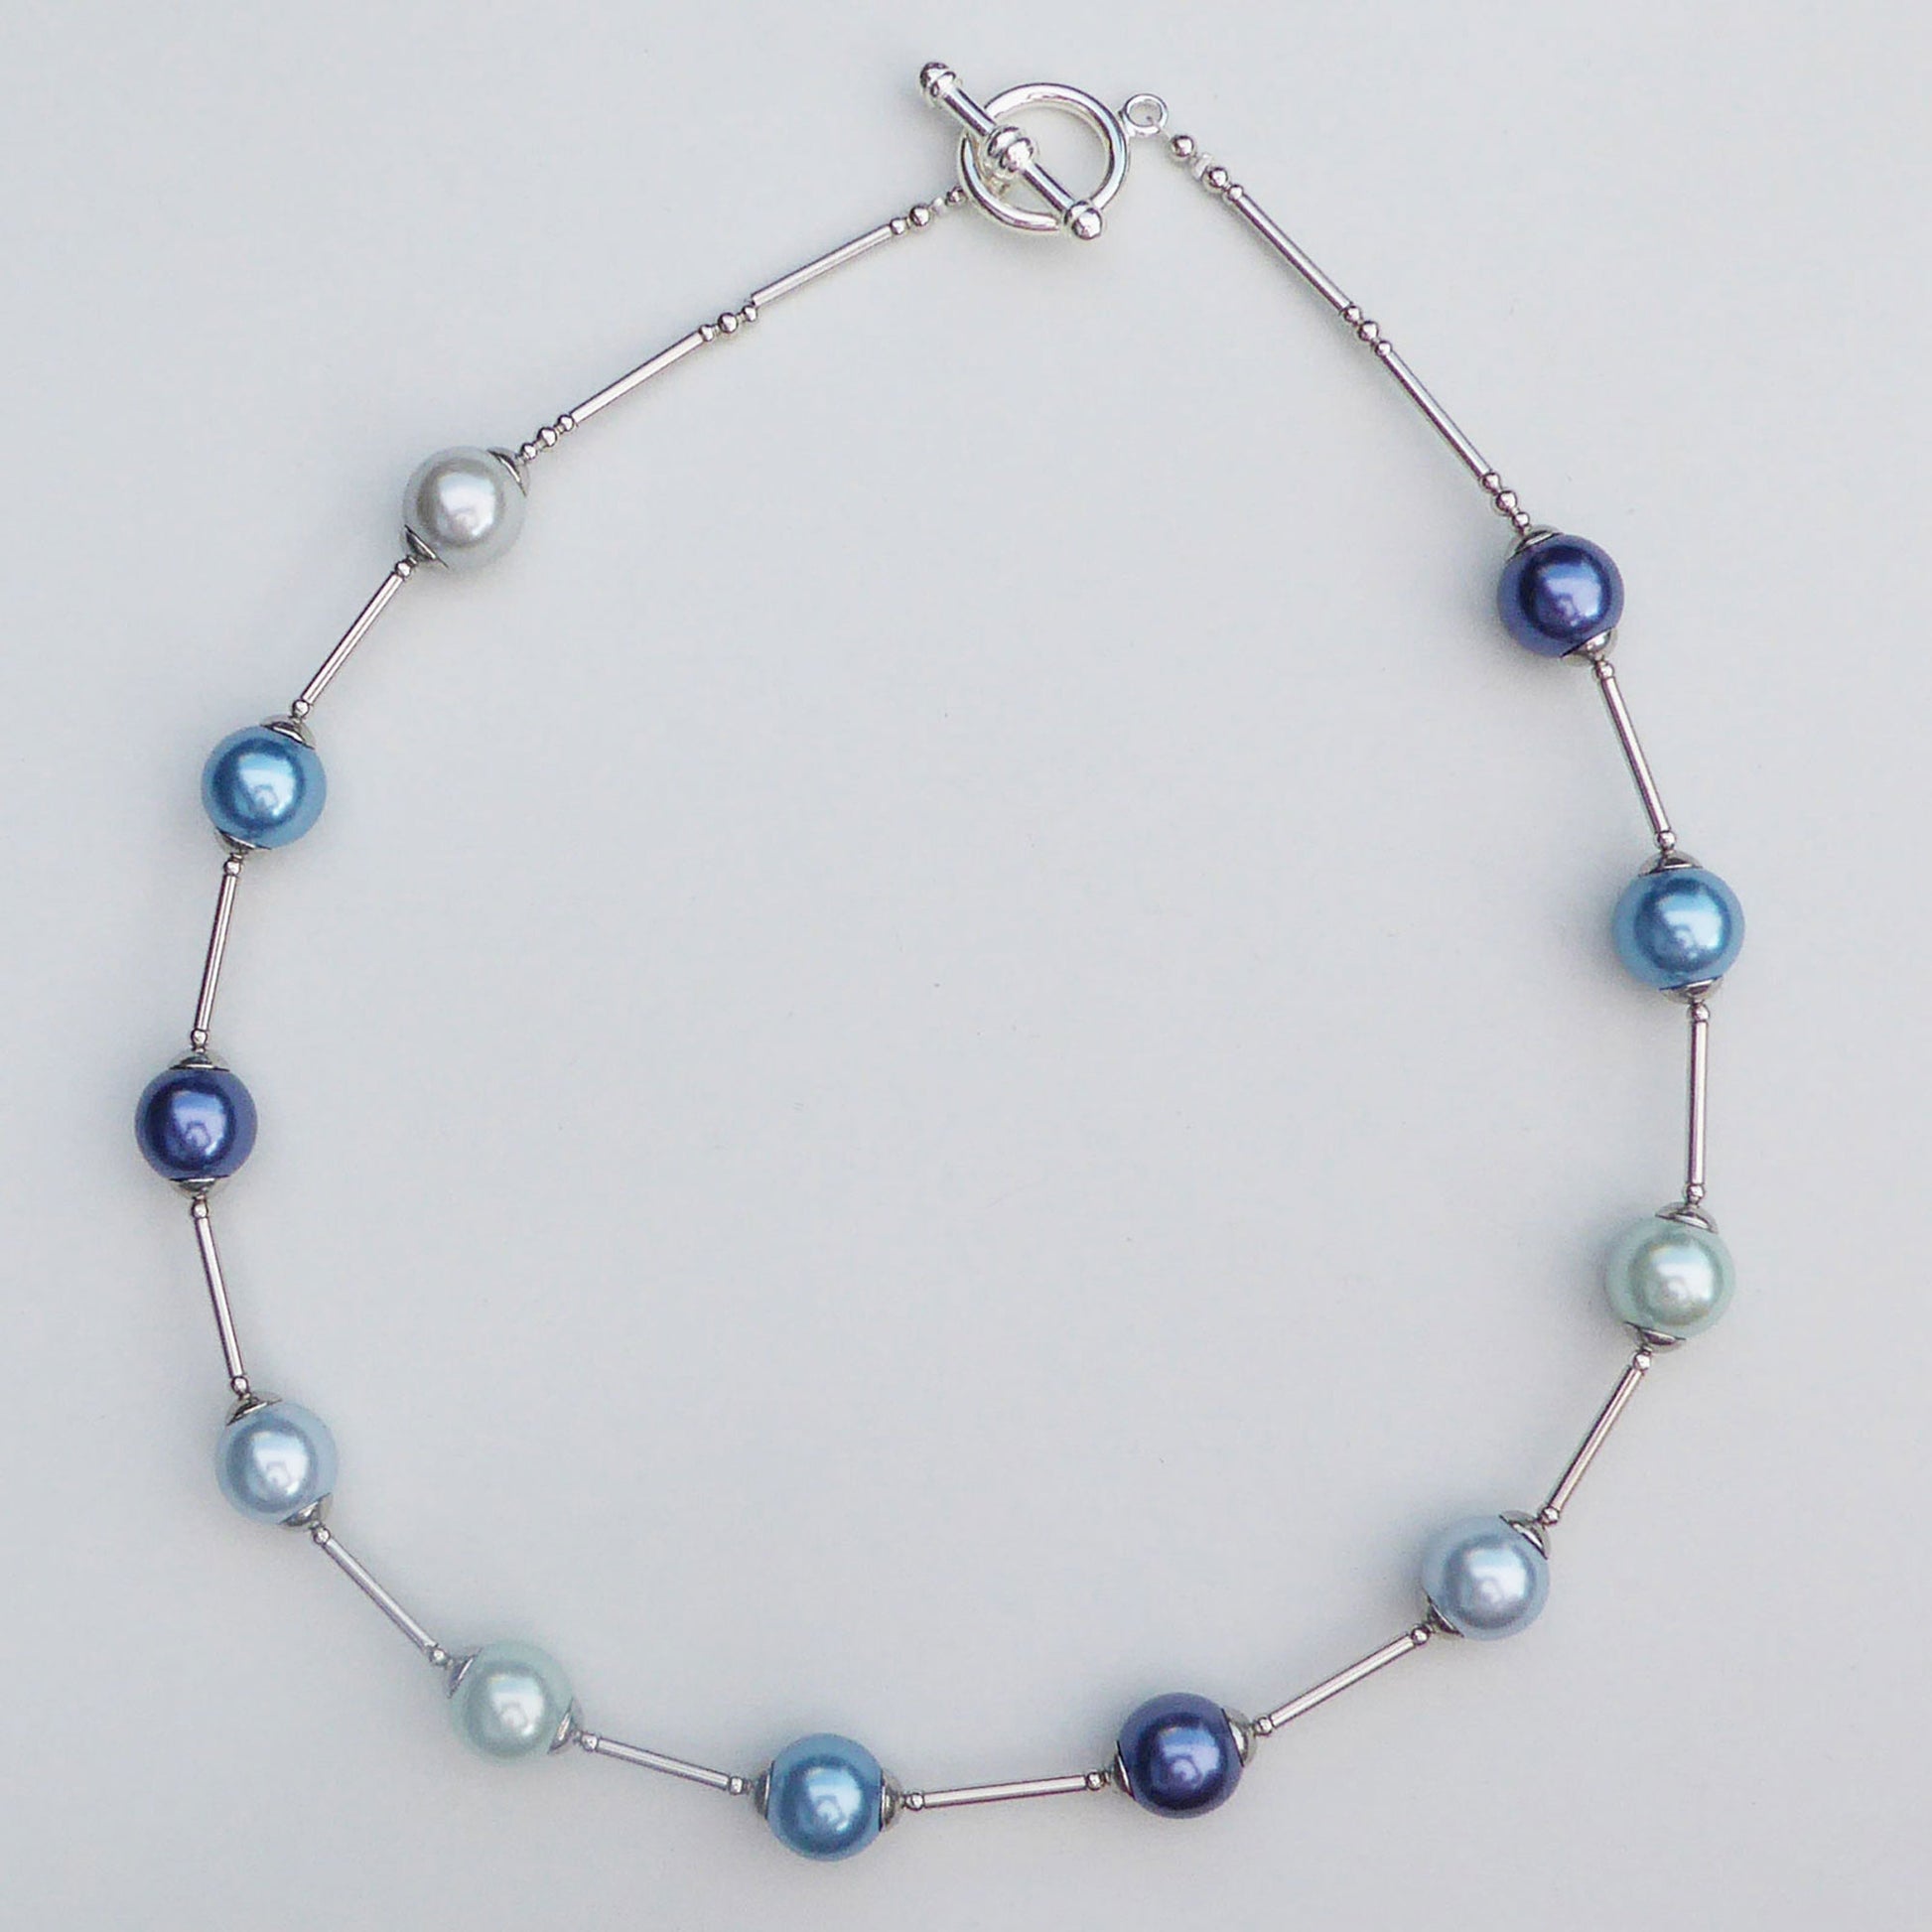 Glass pearl orb-style necklace in blue shades